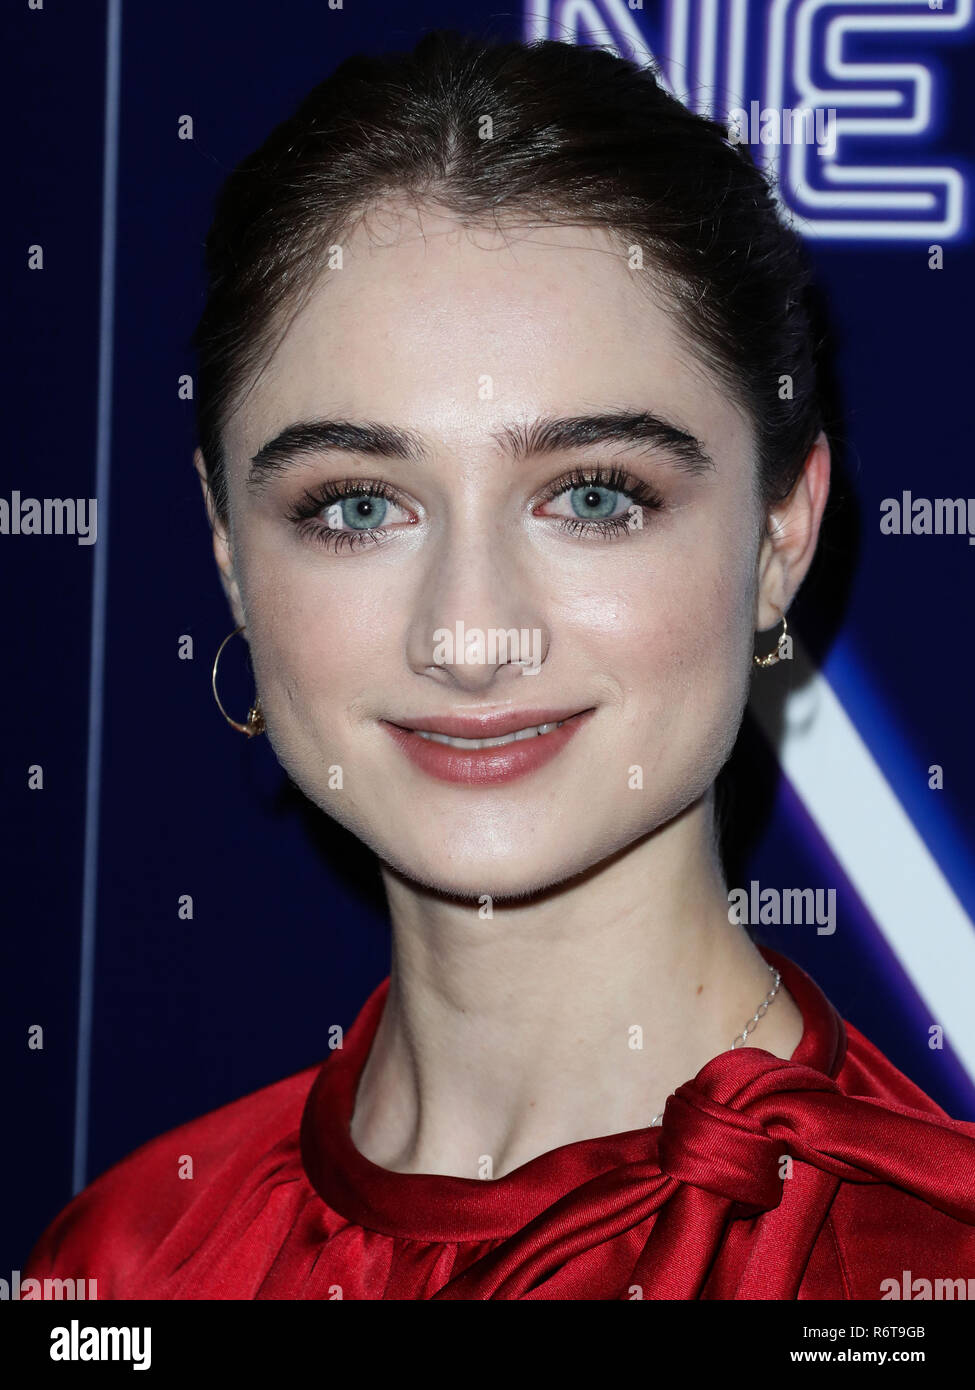 HOLLYWOOD, LOS ANGELES, CA, USA - DECEMBER 05: Actress Raffey Cassidy arrives at the Los Angeles Premiere Of Neon's 'Vox Lux' held at ArcLight Hollywood on December 5, 2018 in Hollywood, Los Angeles, California, United States. (Photo by Xavier Collin/Image Press Agency) Stock Photo